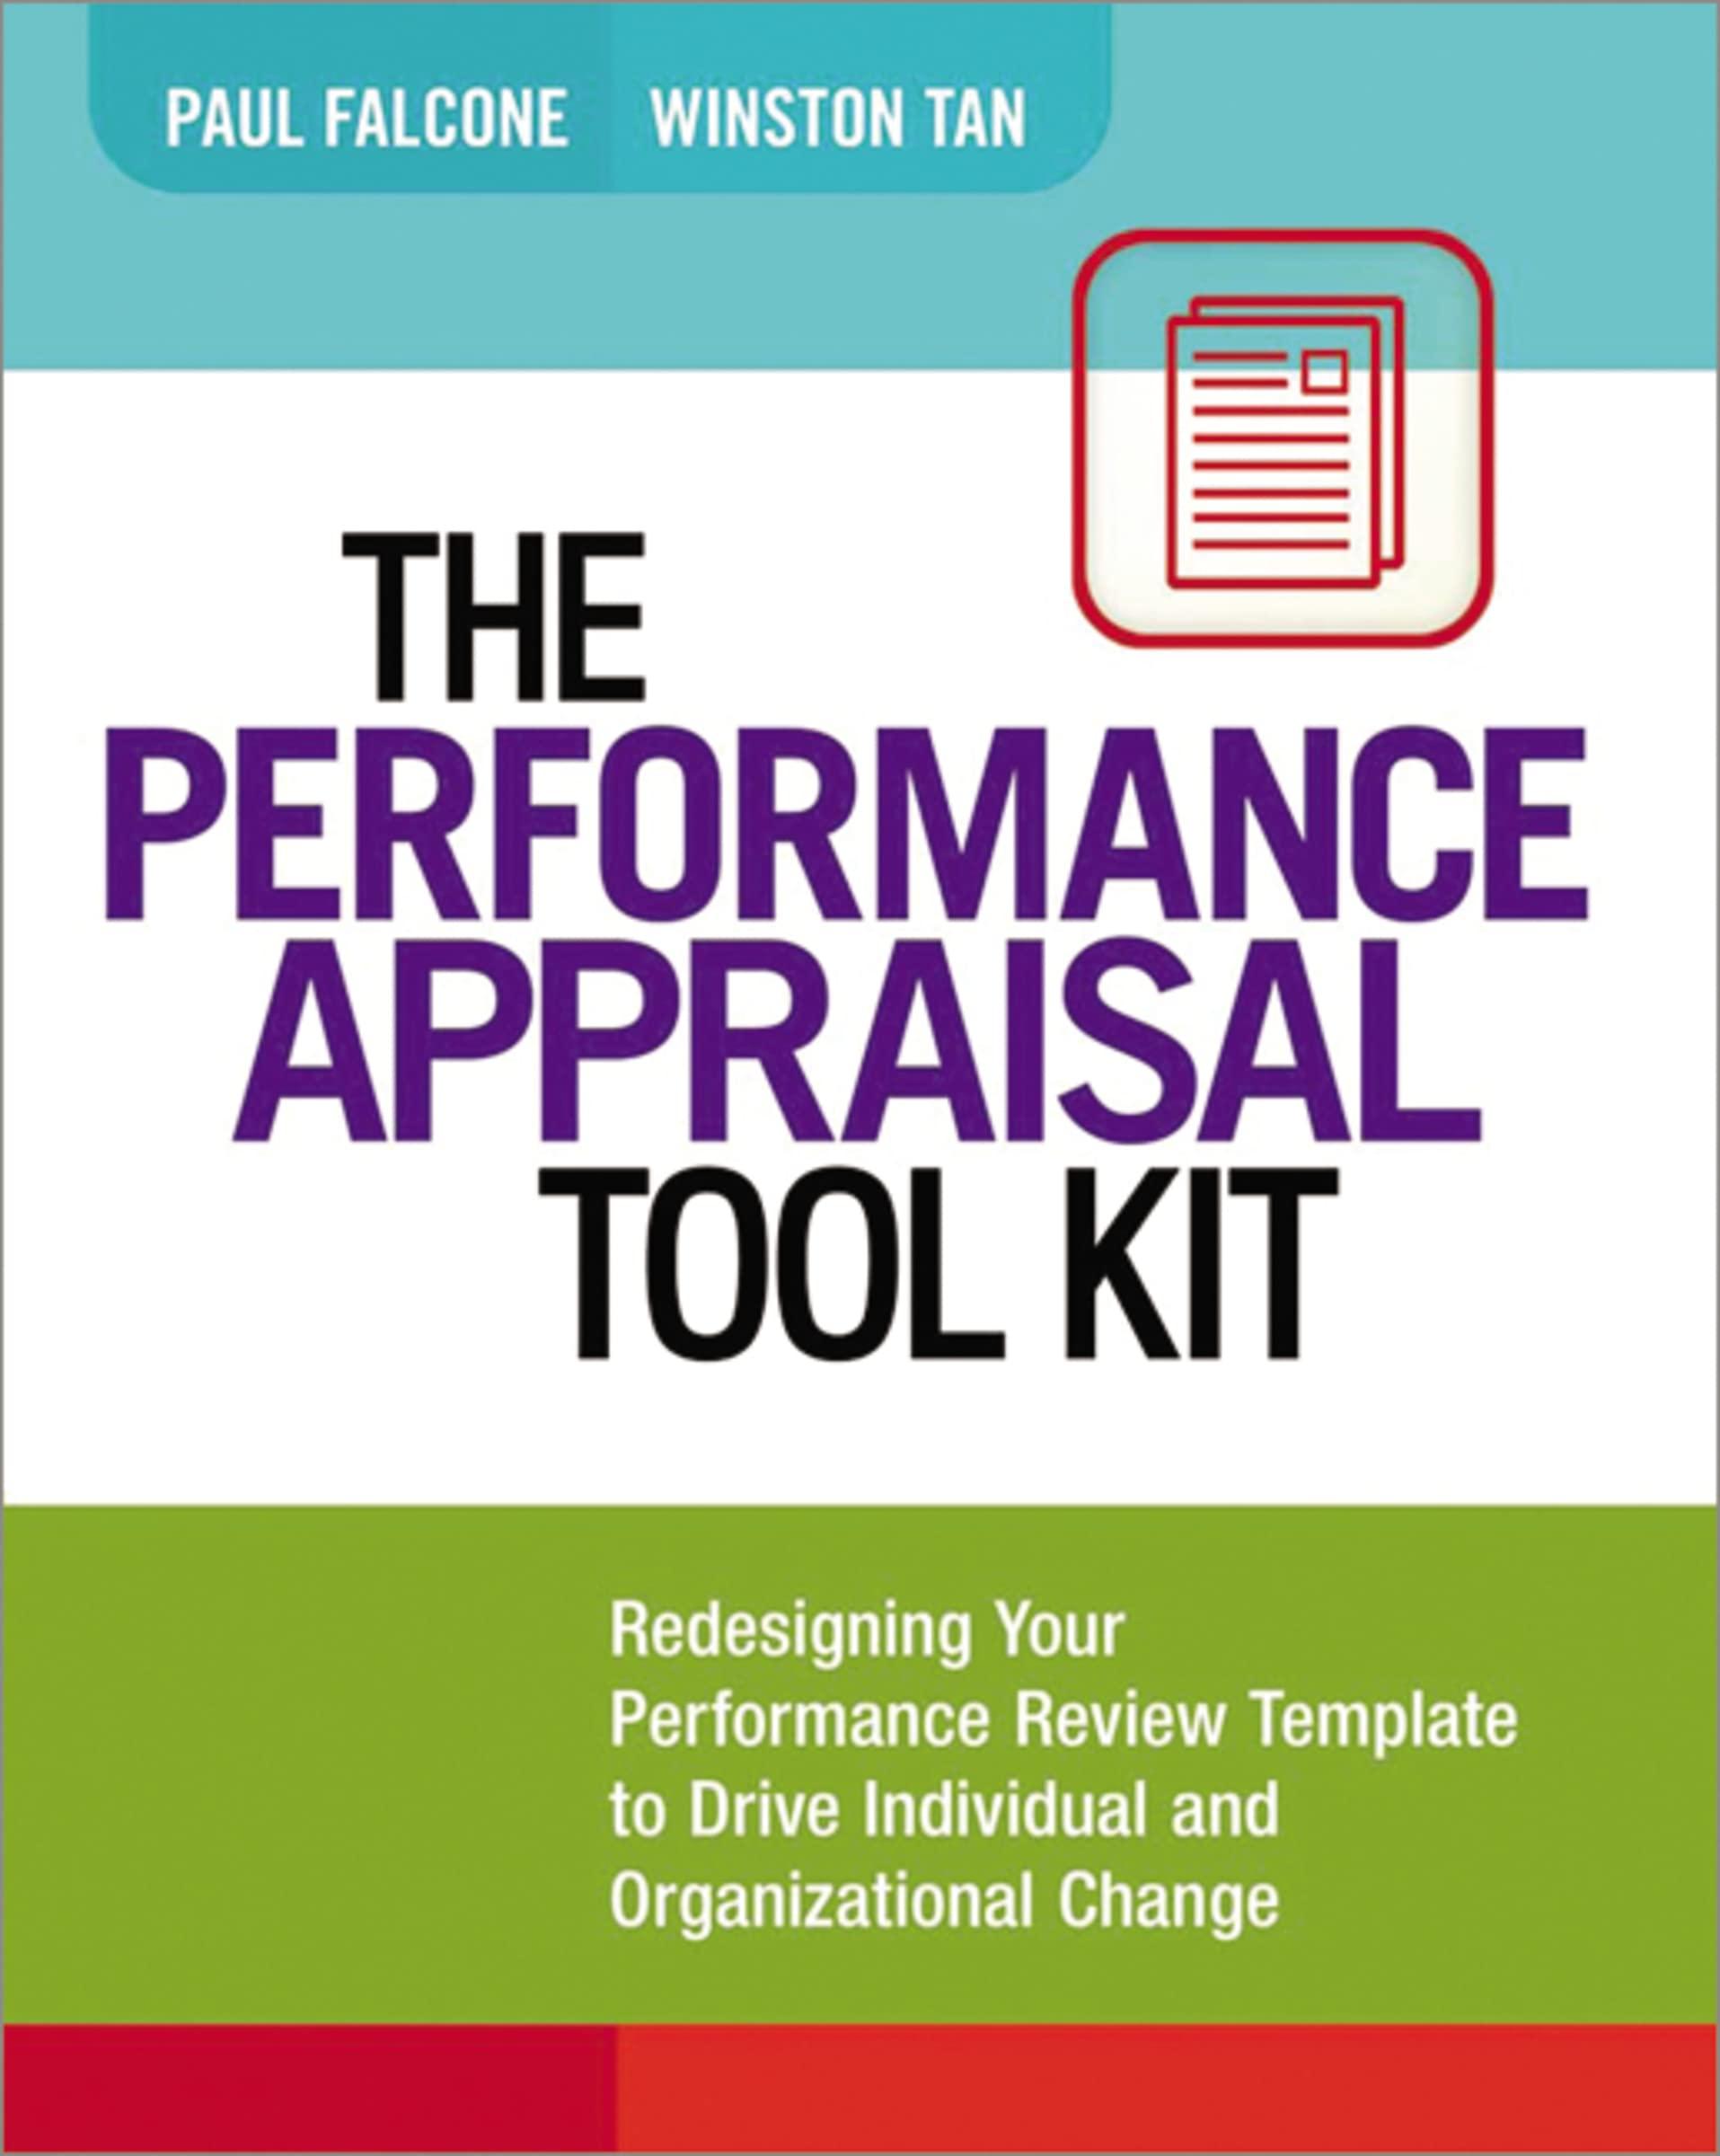 the performance appraisal tool kit redesigning your performance review template to drive individual and